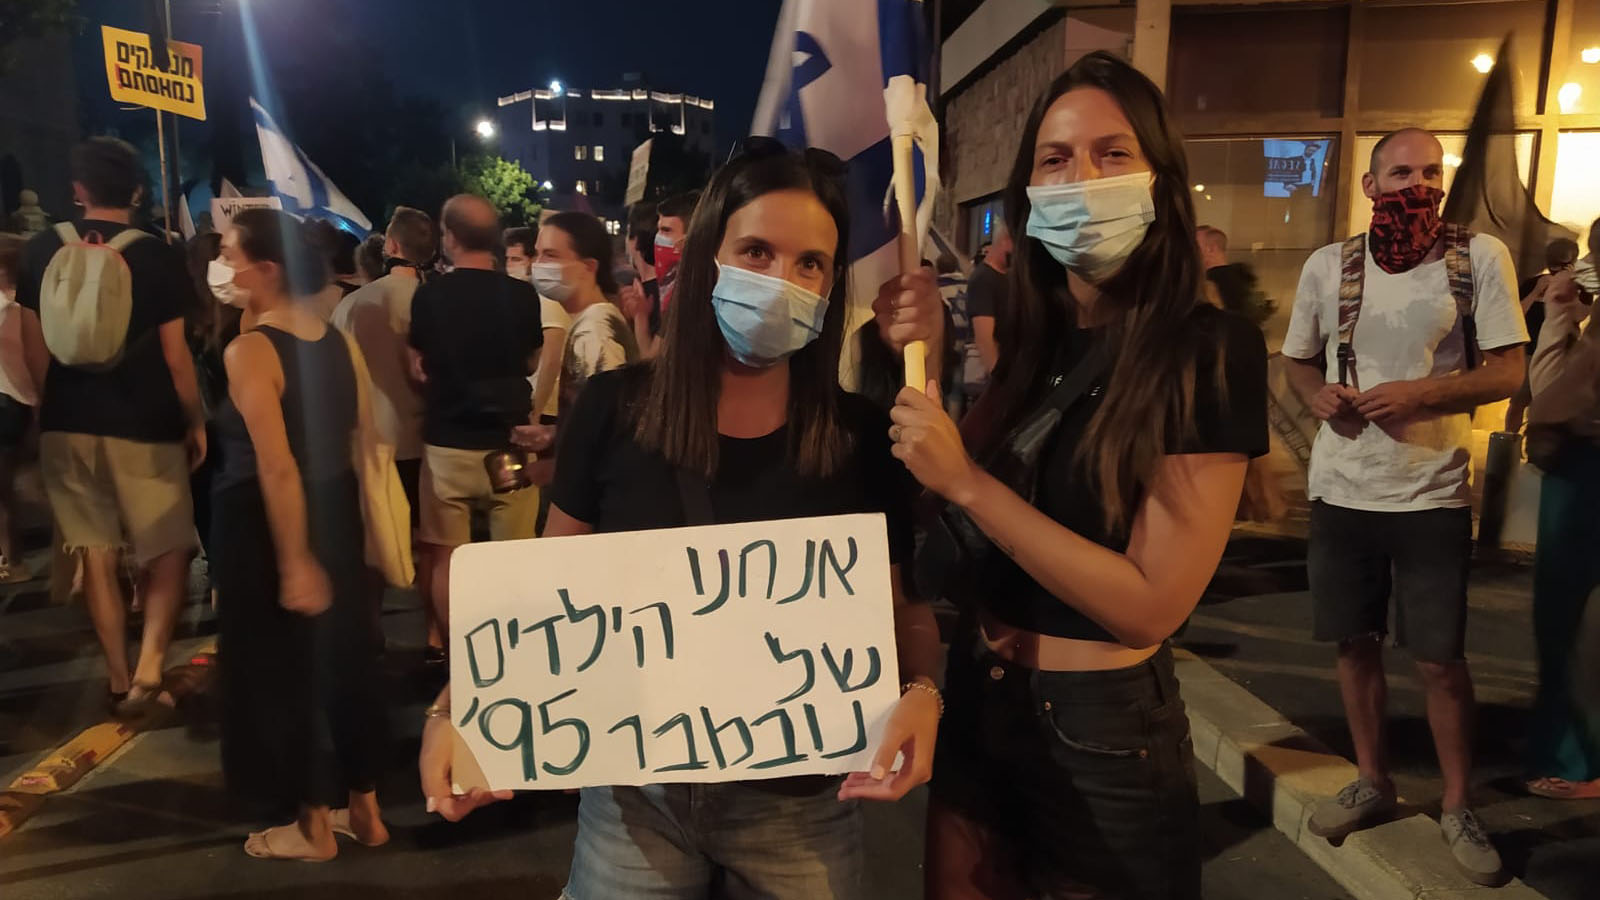 Roni and Noa, 25, from Tel Aviv, came because of their unemployed friends and their parents' suffering (Photo: Yahel Faraj)